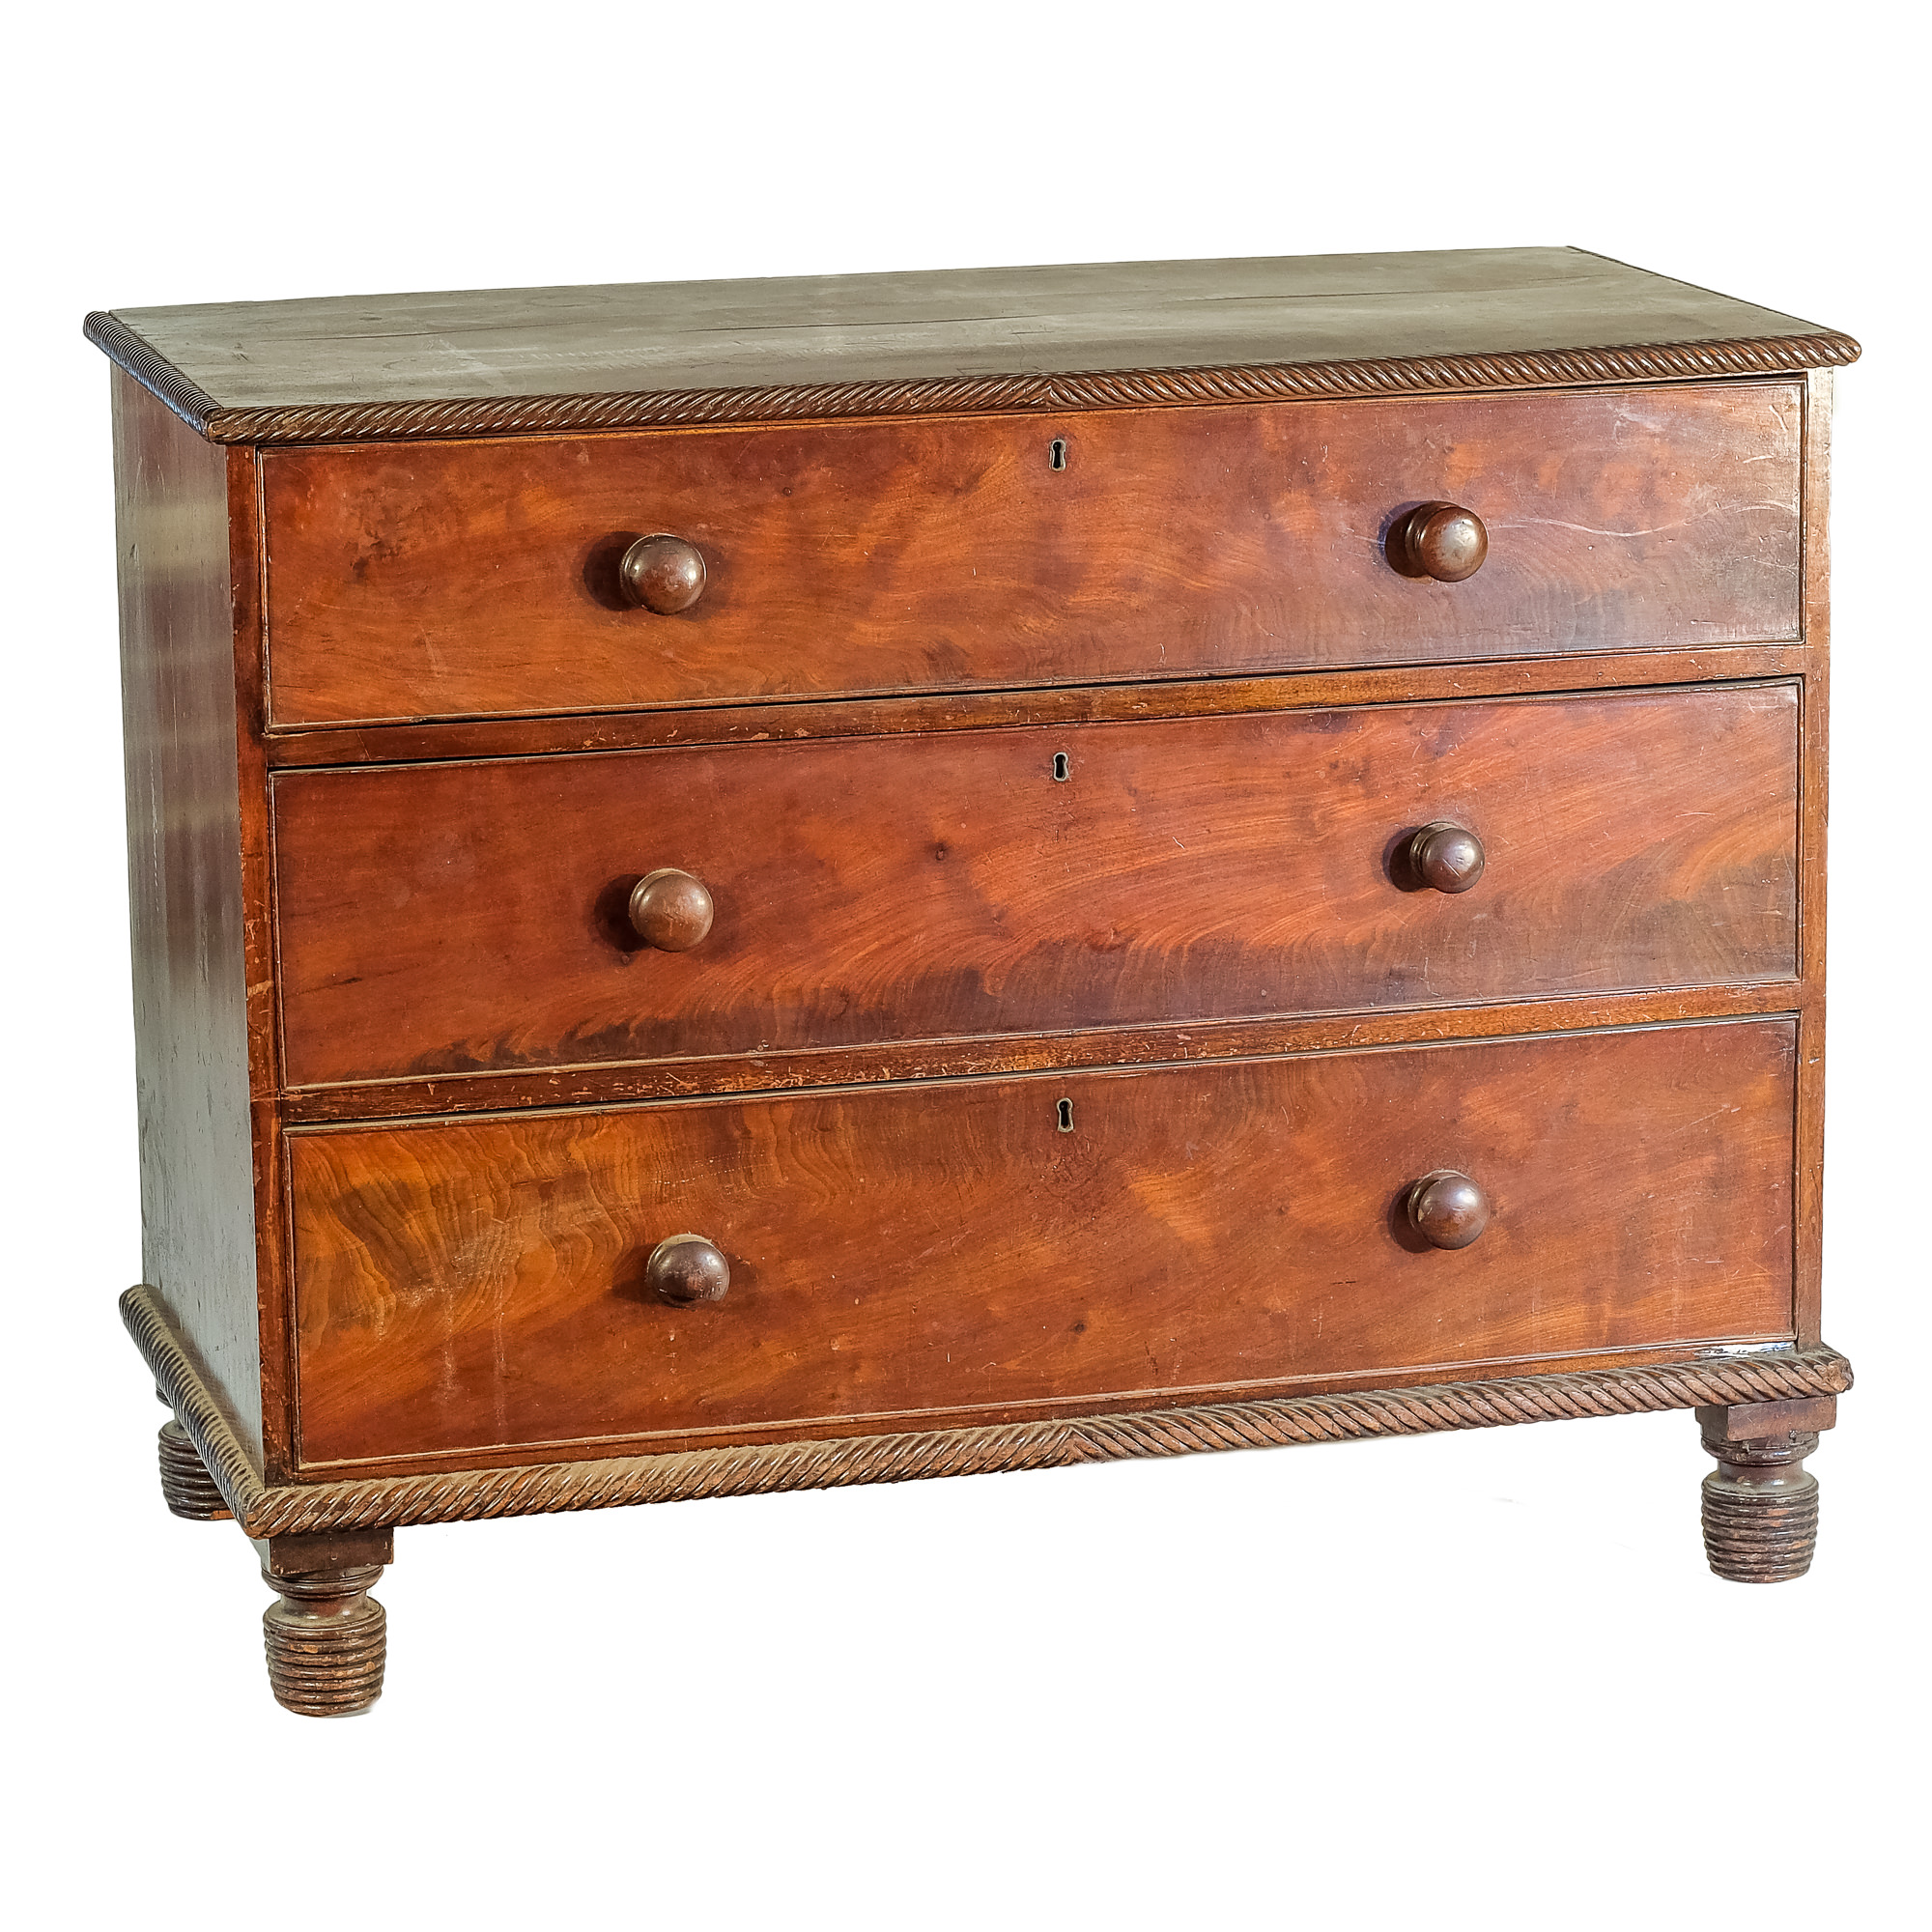 'Early Victorian Mahogany Chest of Drawers Circa 1840'